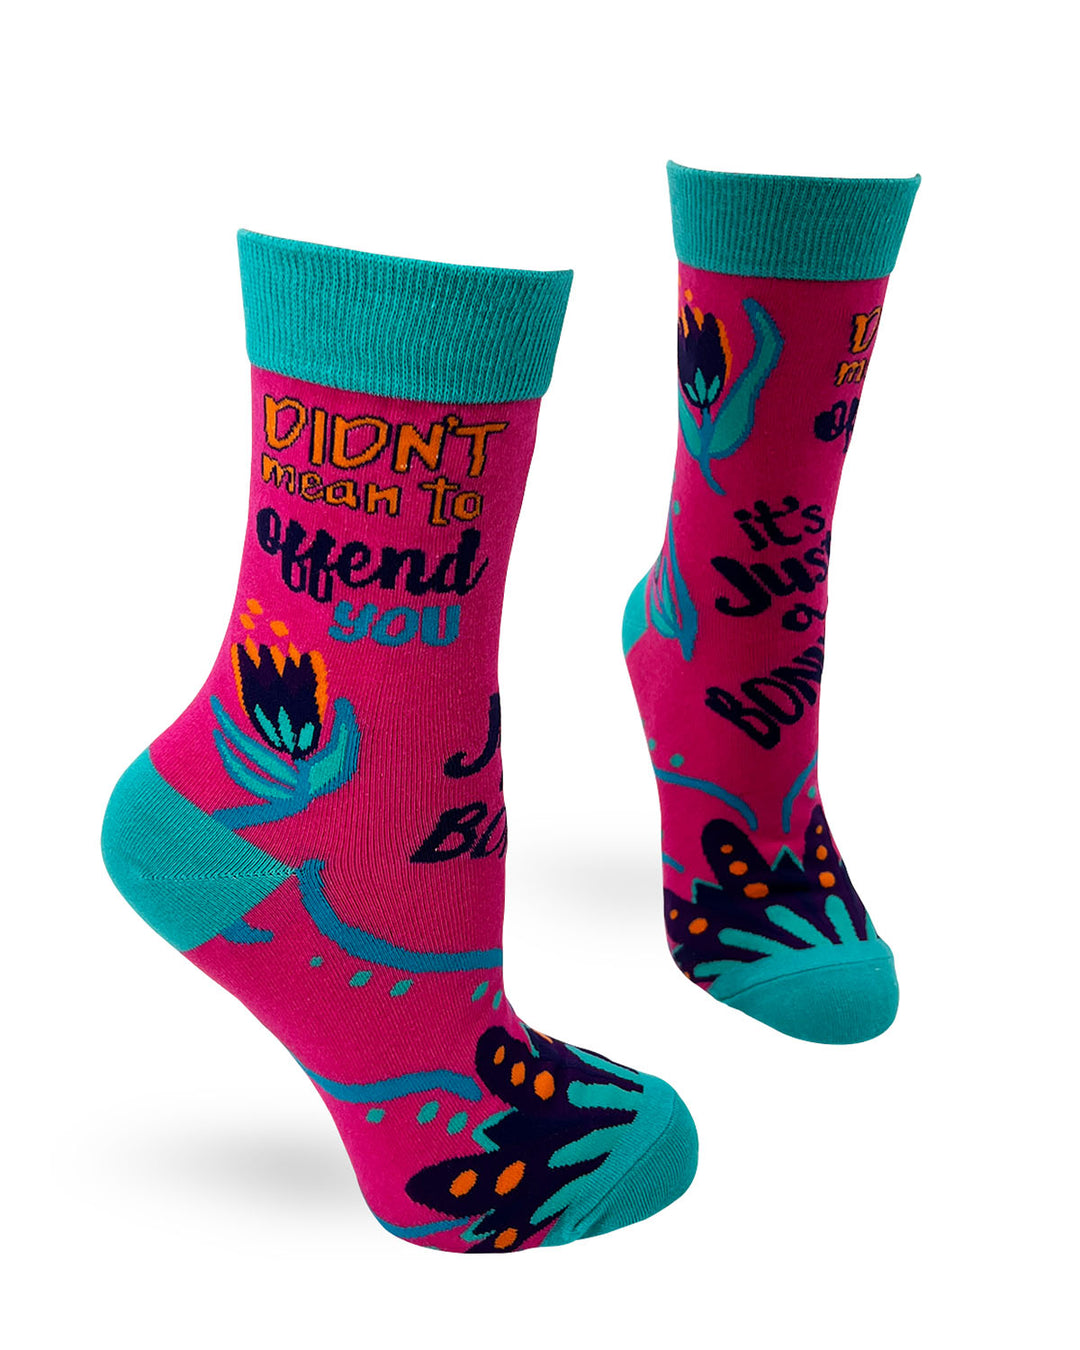 Didn't Mean to Offend You, it's Just a Bonus! Women's Crew Socks